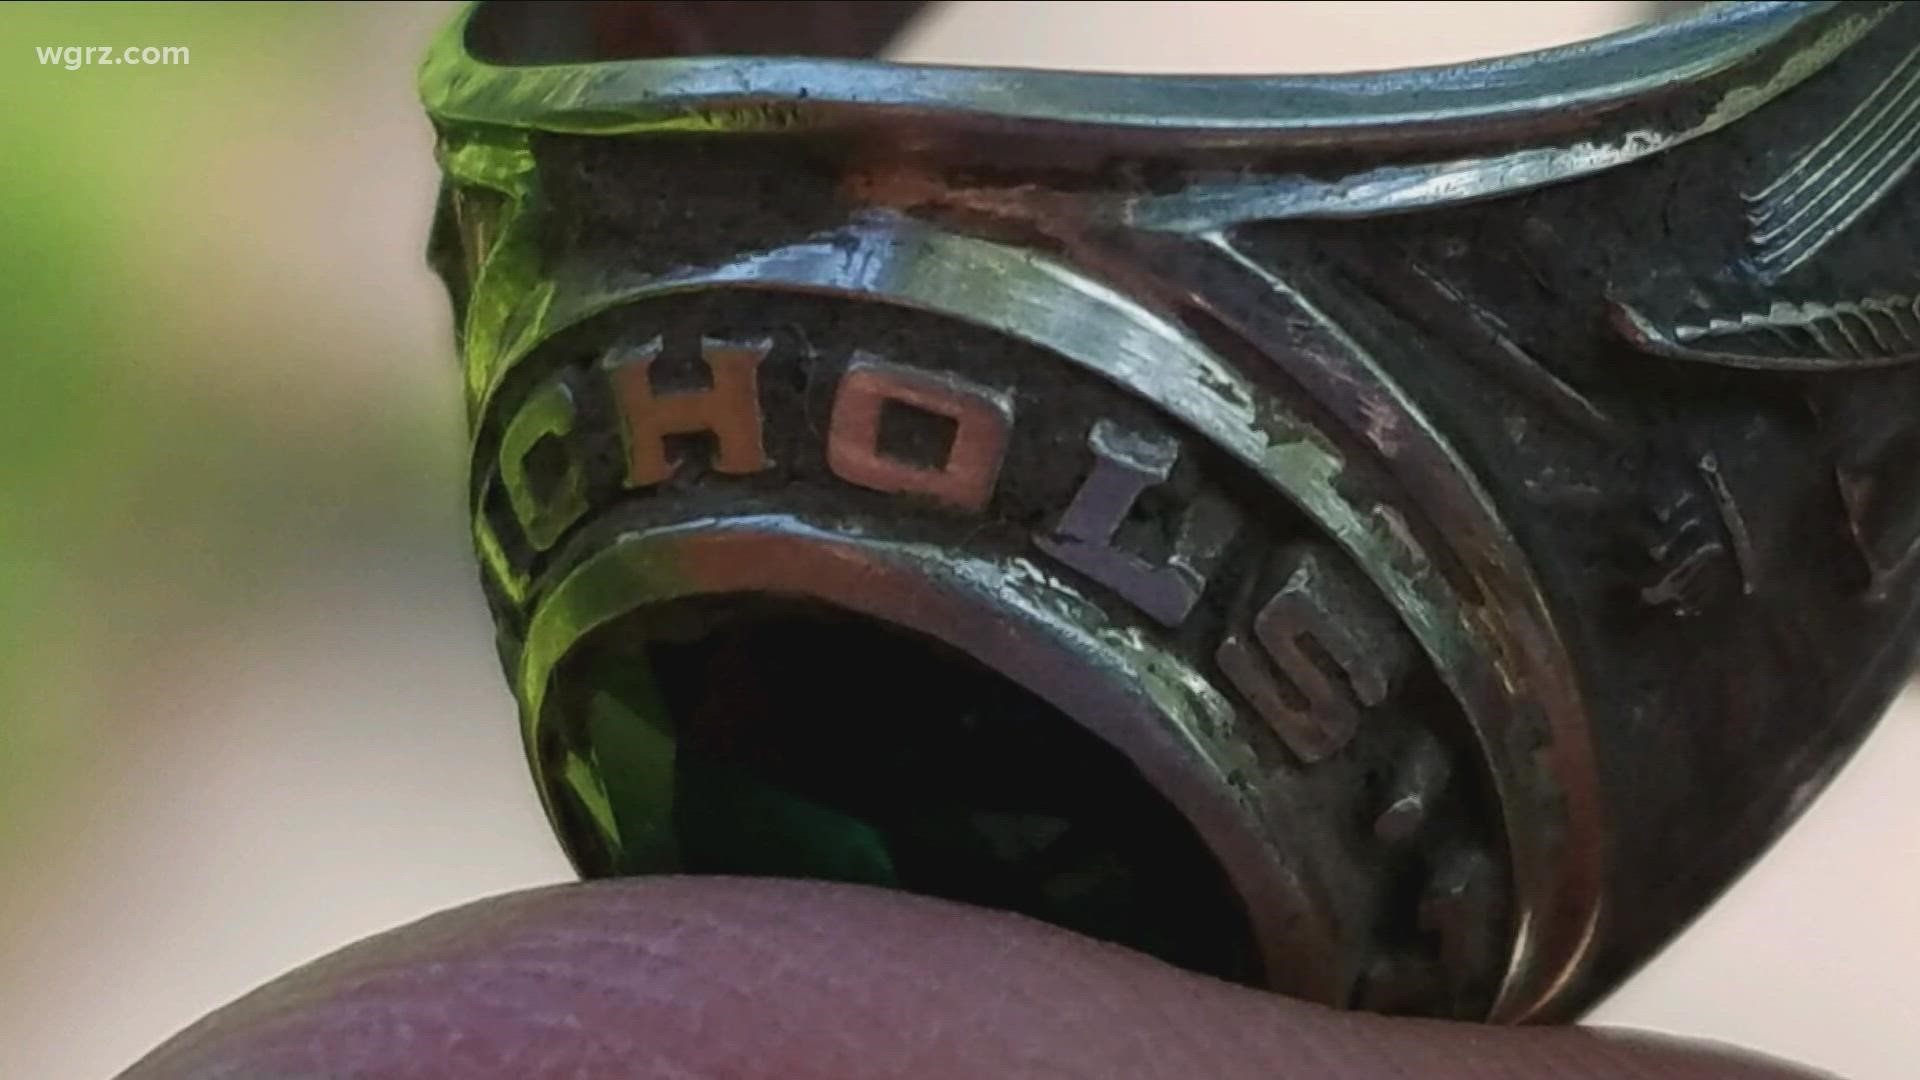 Lost class ring reunited with owner